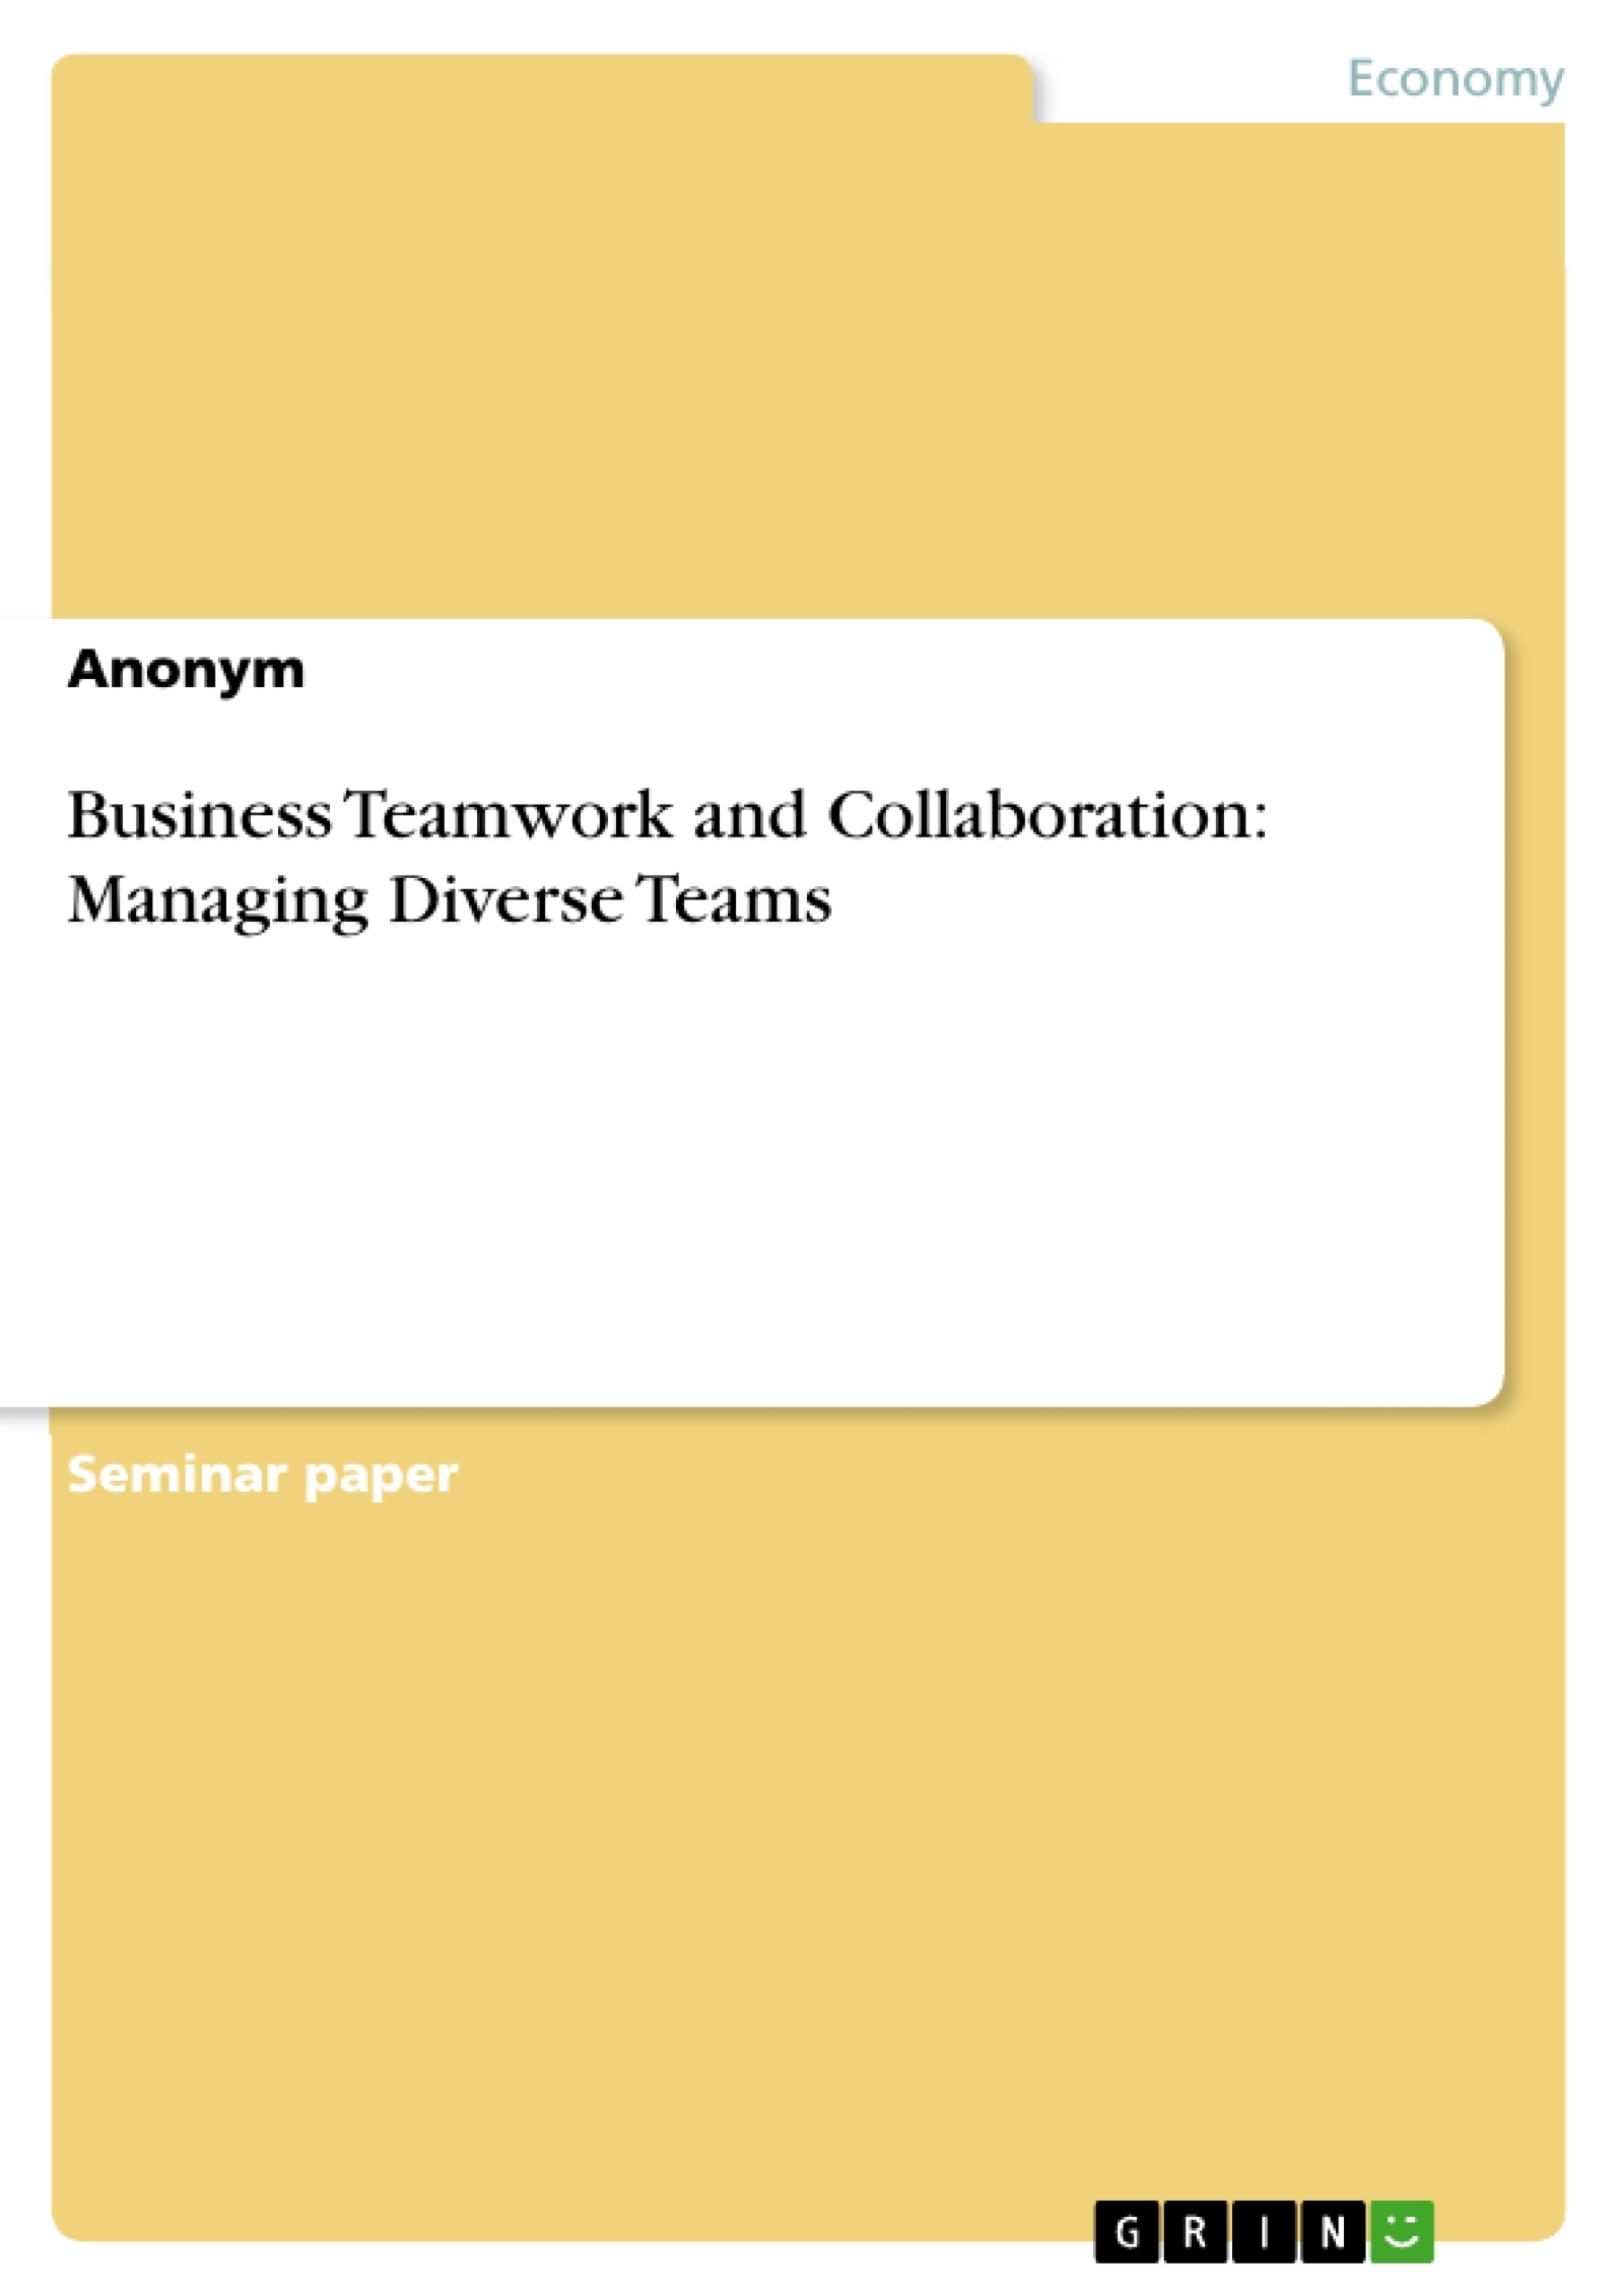 Title: Business Teamwork and Collaboration: Managing Diverse Teams